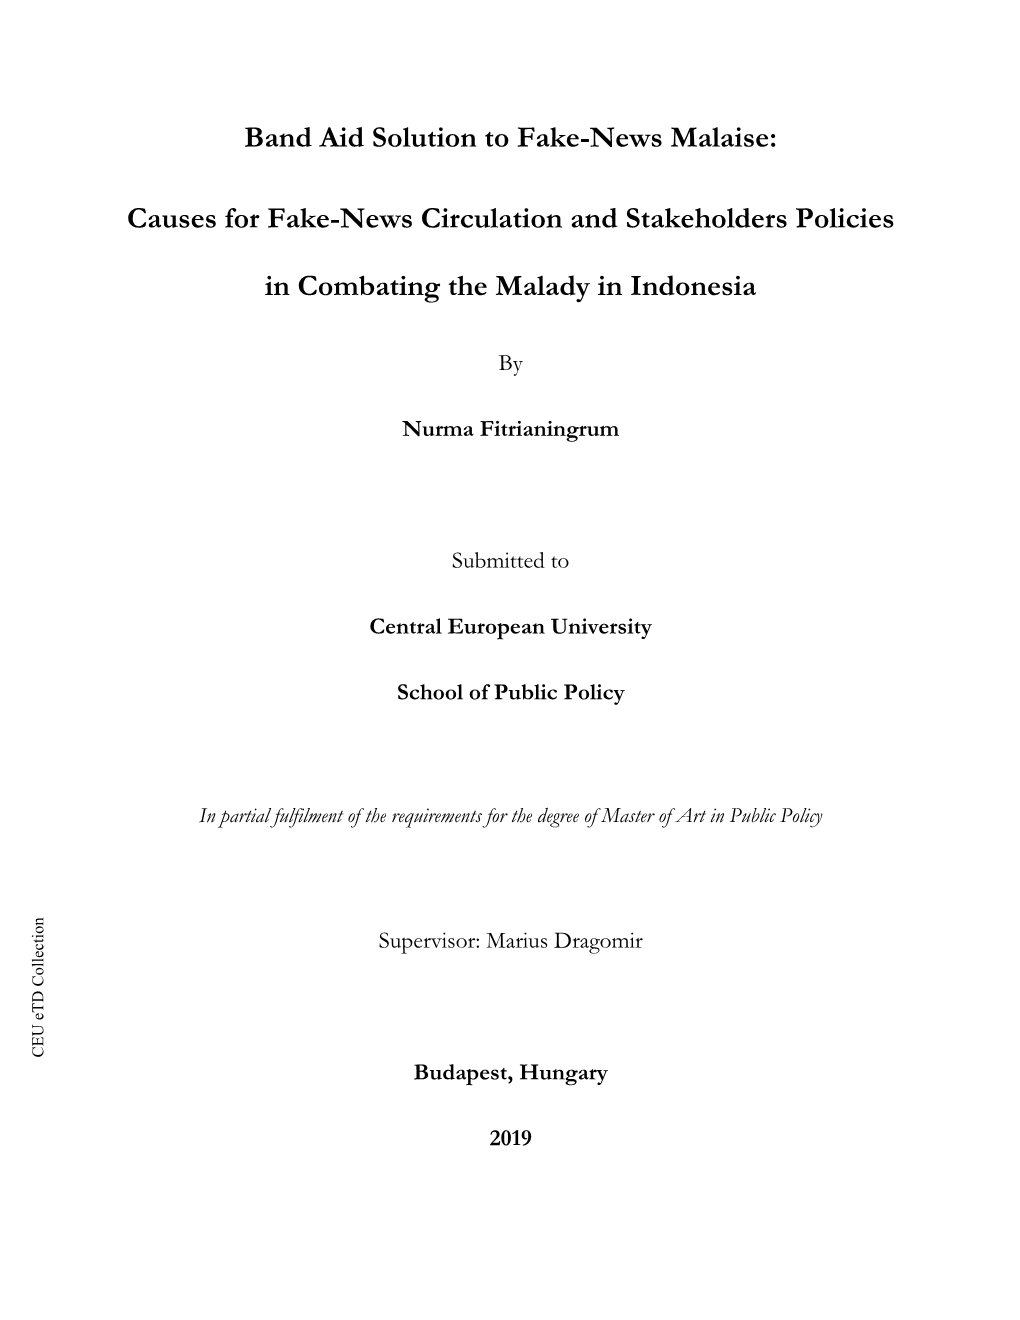 Causes for Fake-News Circulation and Stakeholders Policies In